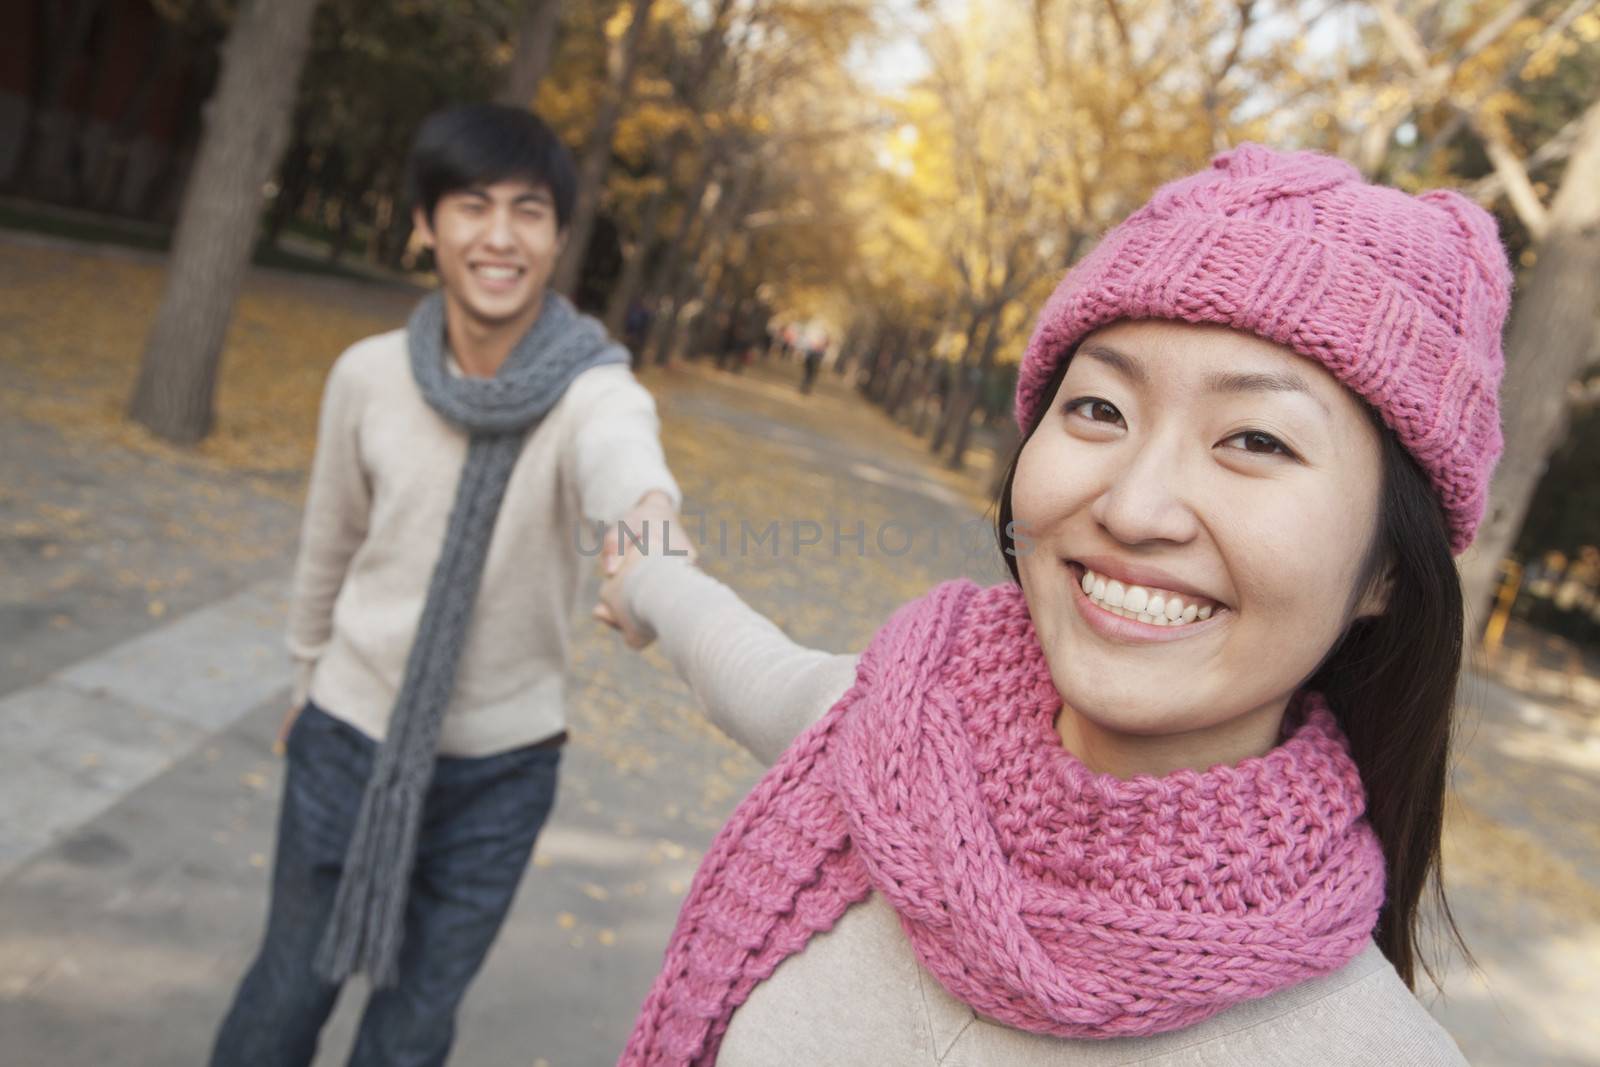 Portrait of Smiling Couple Holding Hands in Park